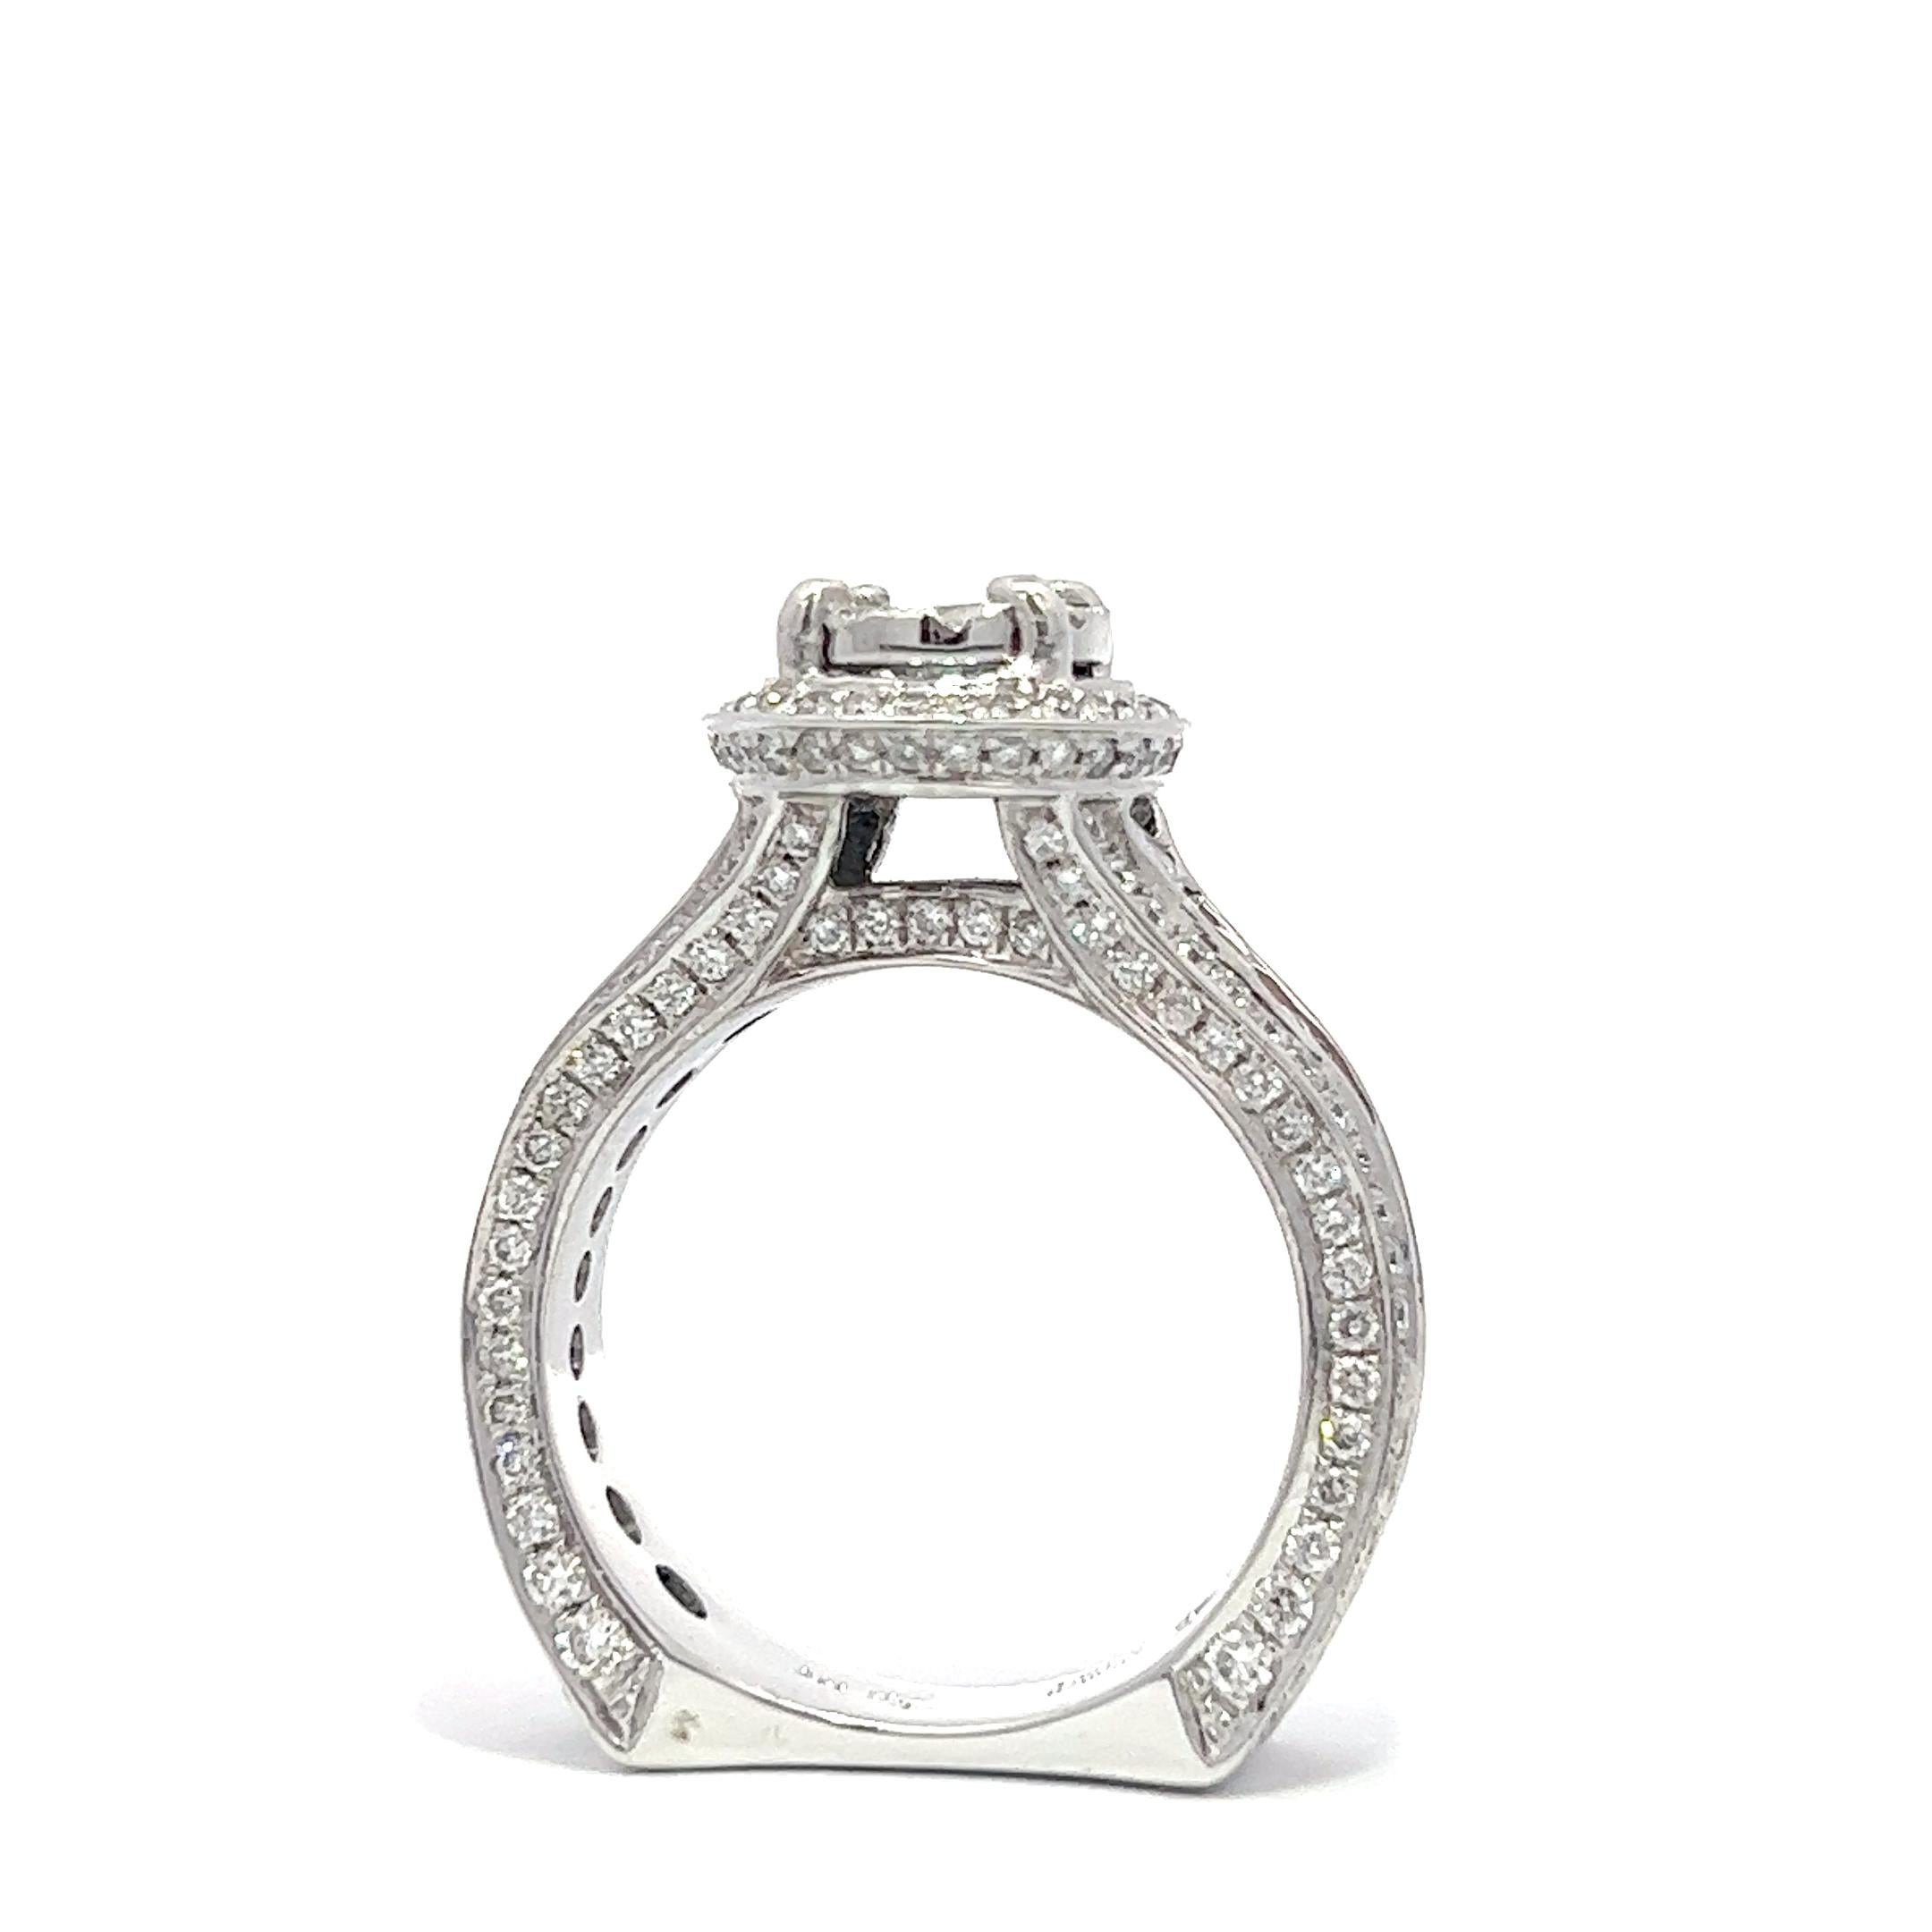 This exquisite engagement ring boasts 2.64ct natural diamonds in G-H color and VS2-SI clarity, set in 14k White gold. It's a one-of-a-kind piece that will undoubtedly express your love and admiration to your significant other. The design is truly